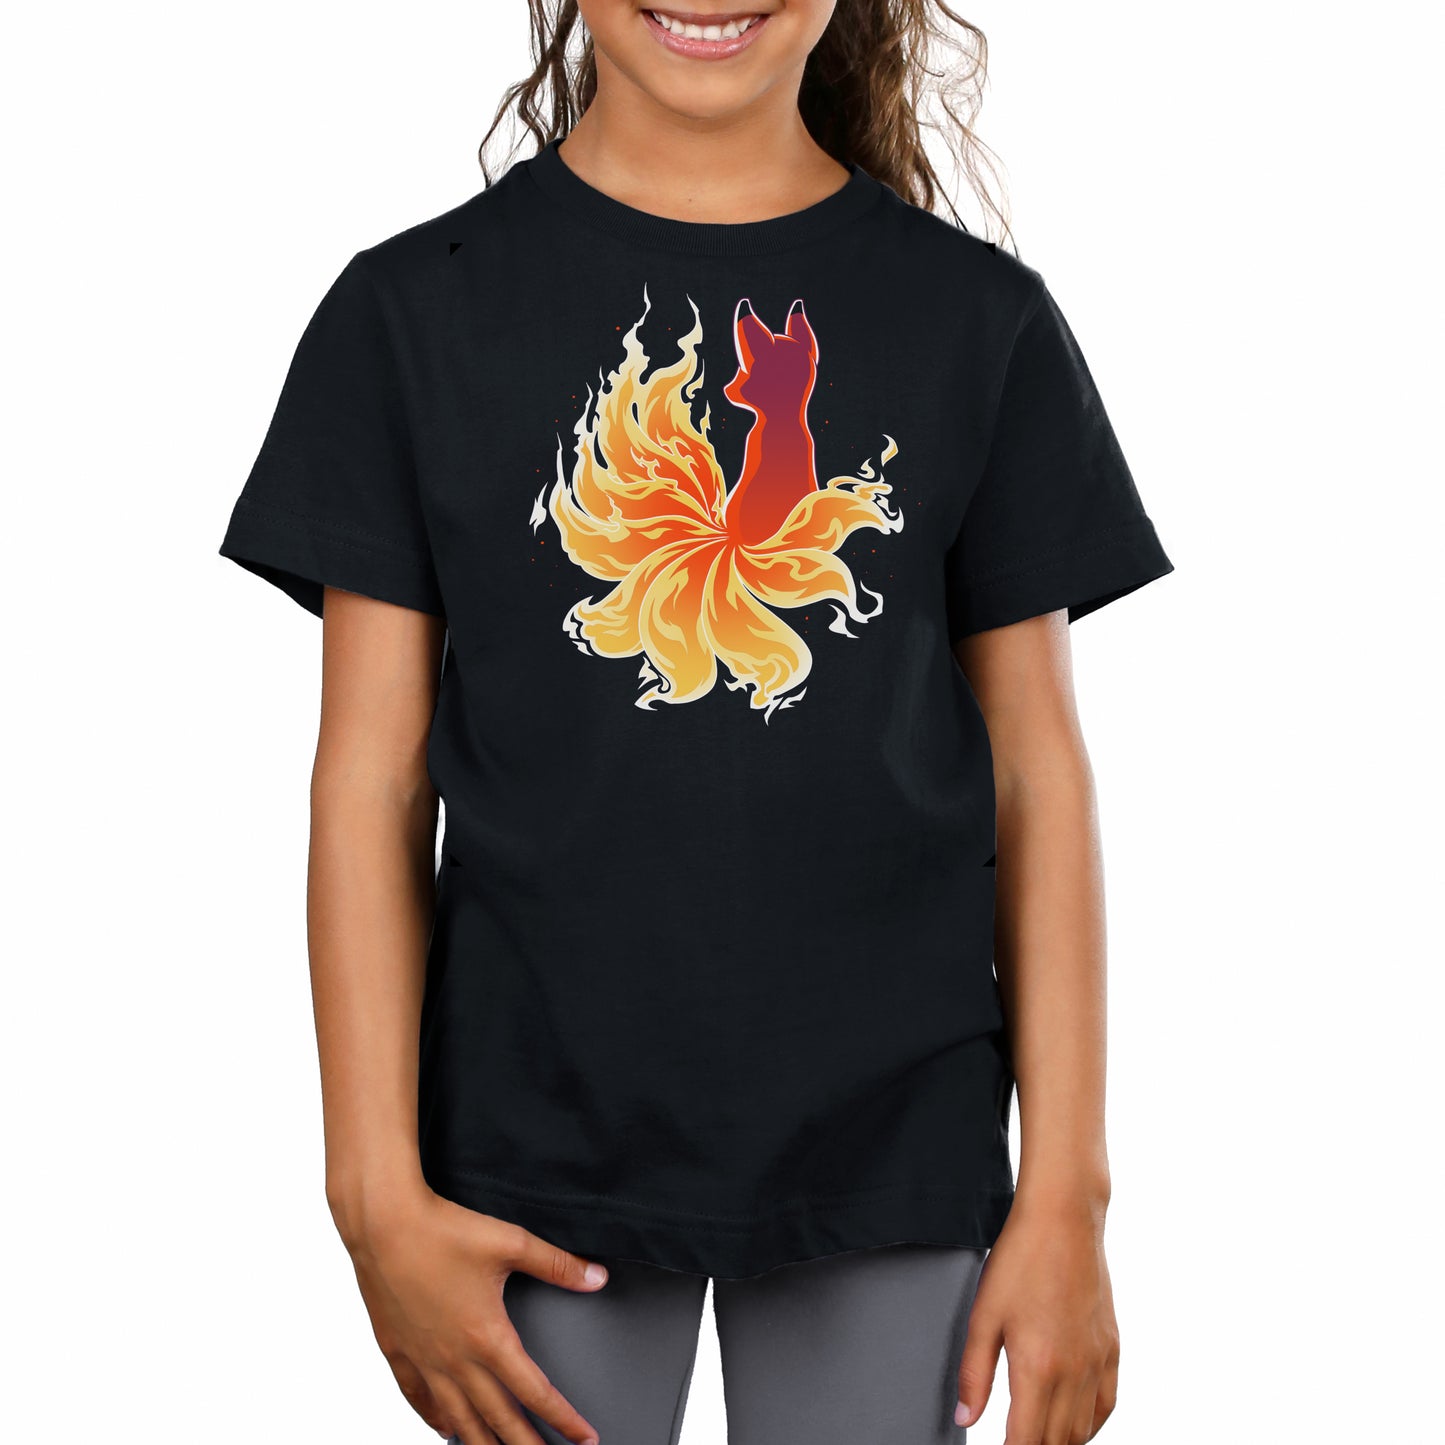 A child wearing a Fire Kitsune unisex tee by monsterdigital with a vibrant graphic of a red Fire Kitsune surrounded by yellow flames stands smiling, enjoying the super soft ringspun cotton fabric.